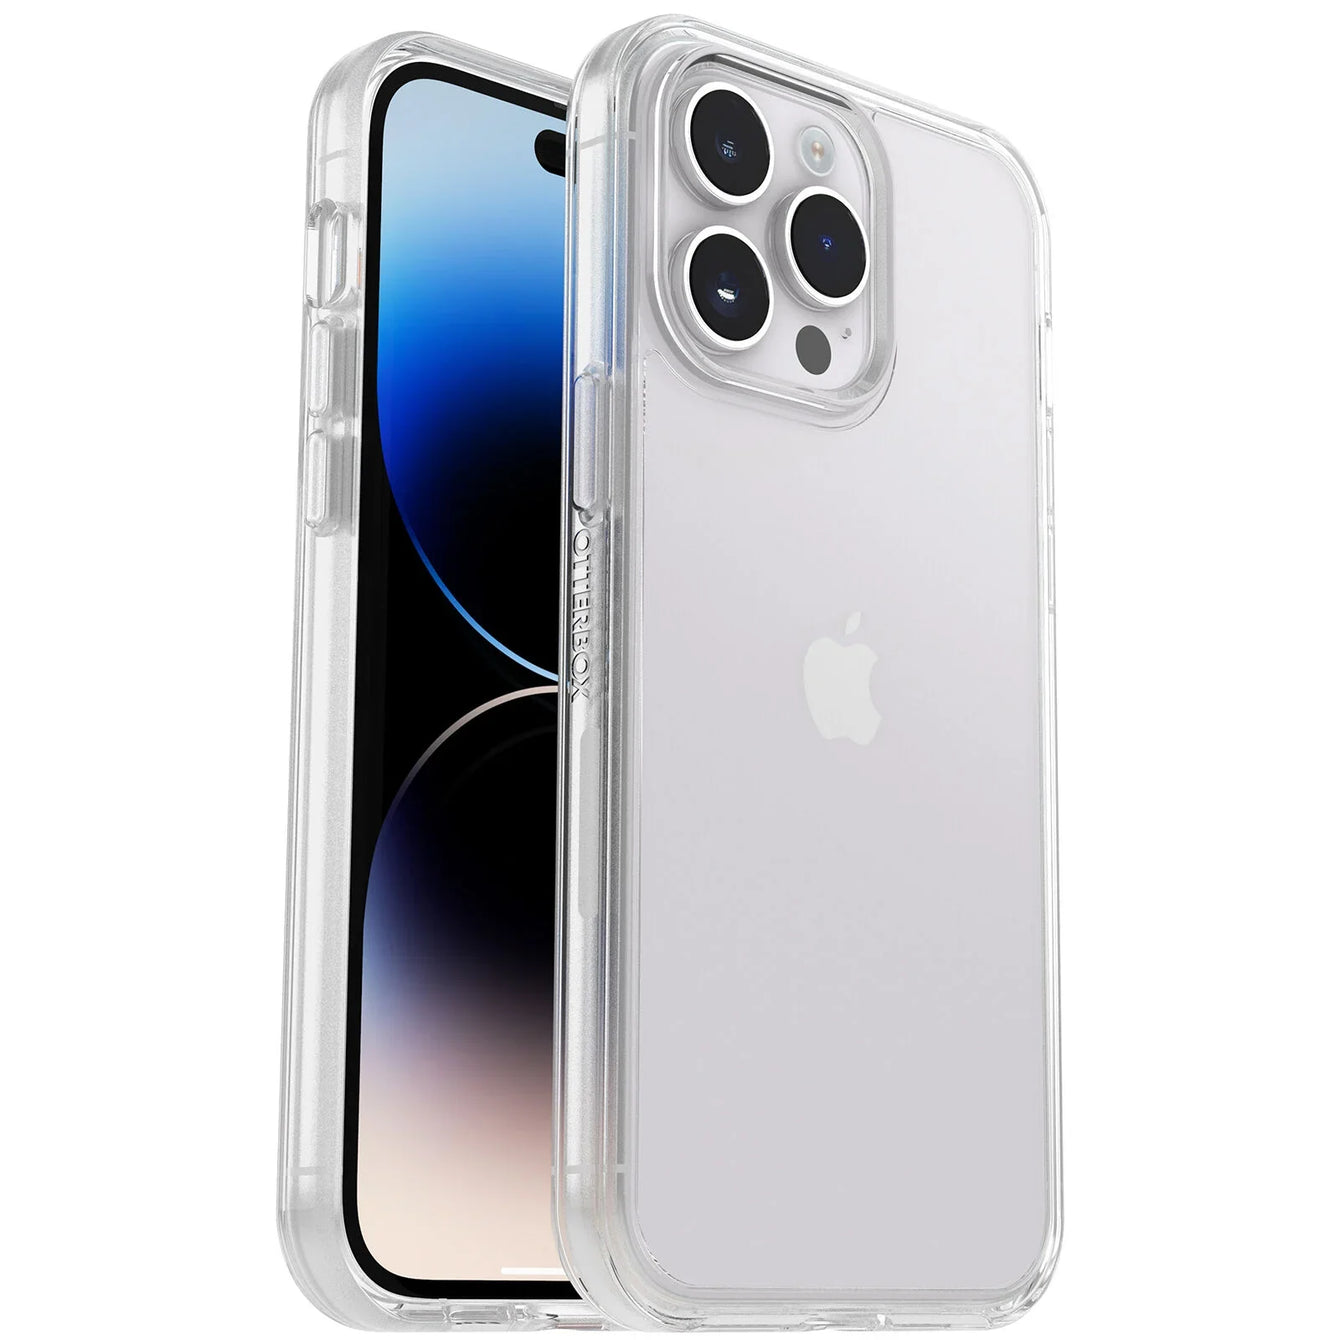 OtterBox Symmetry Clear Case for iPhone 11 Pro